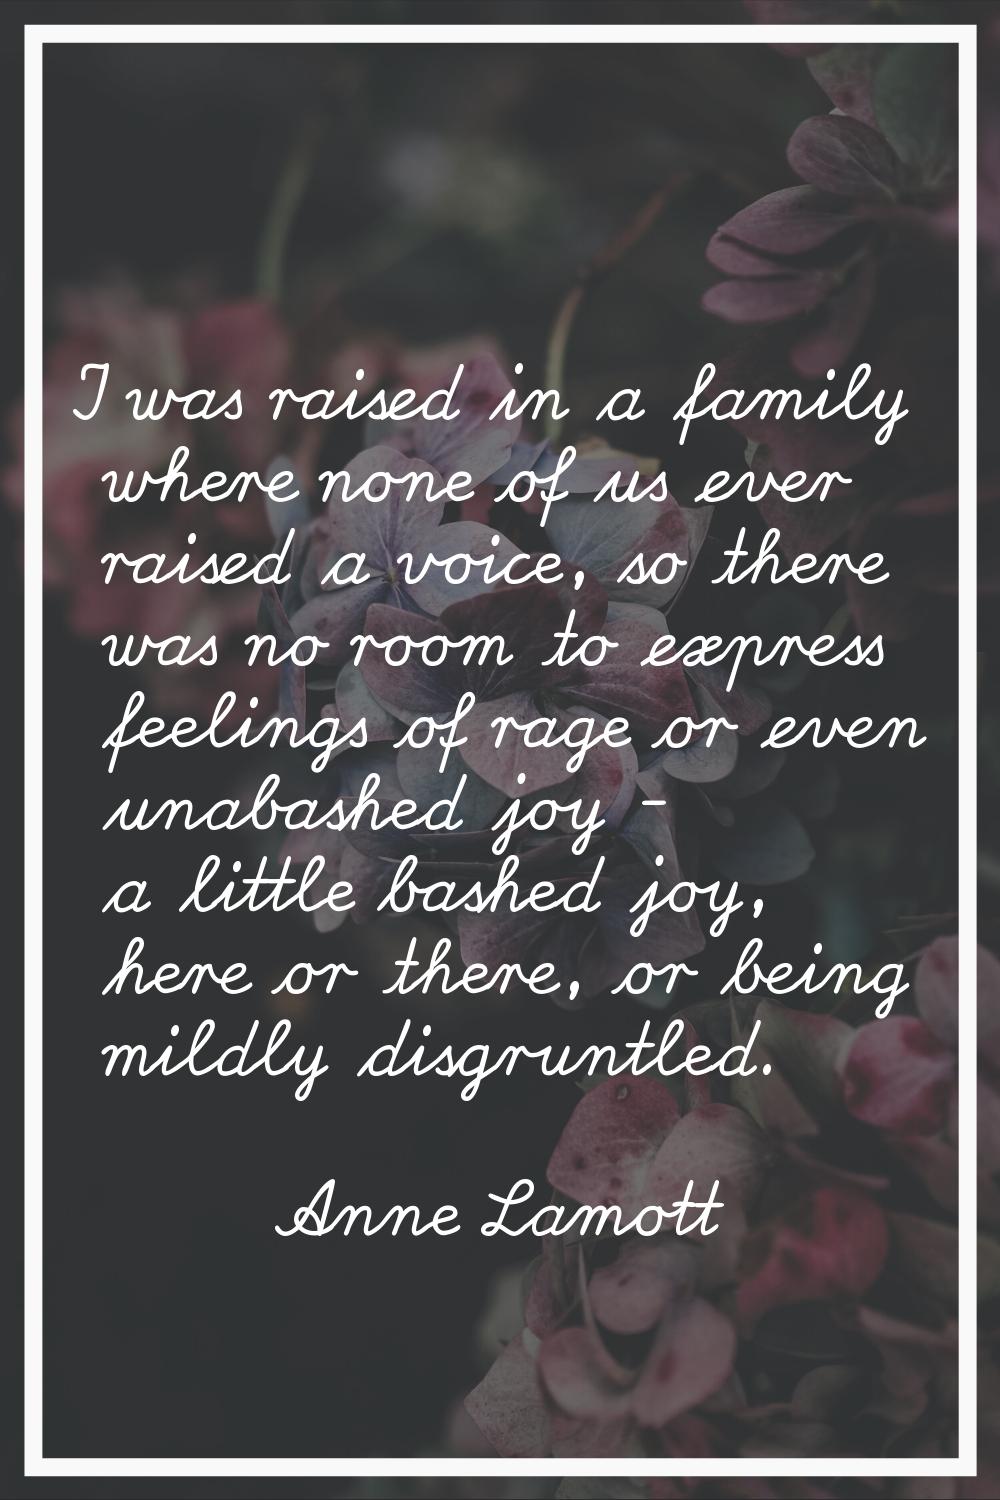 I was raised in a family where none of us ever raised a voice, so there was no room to express feel